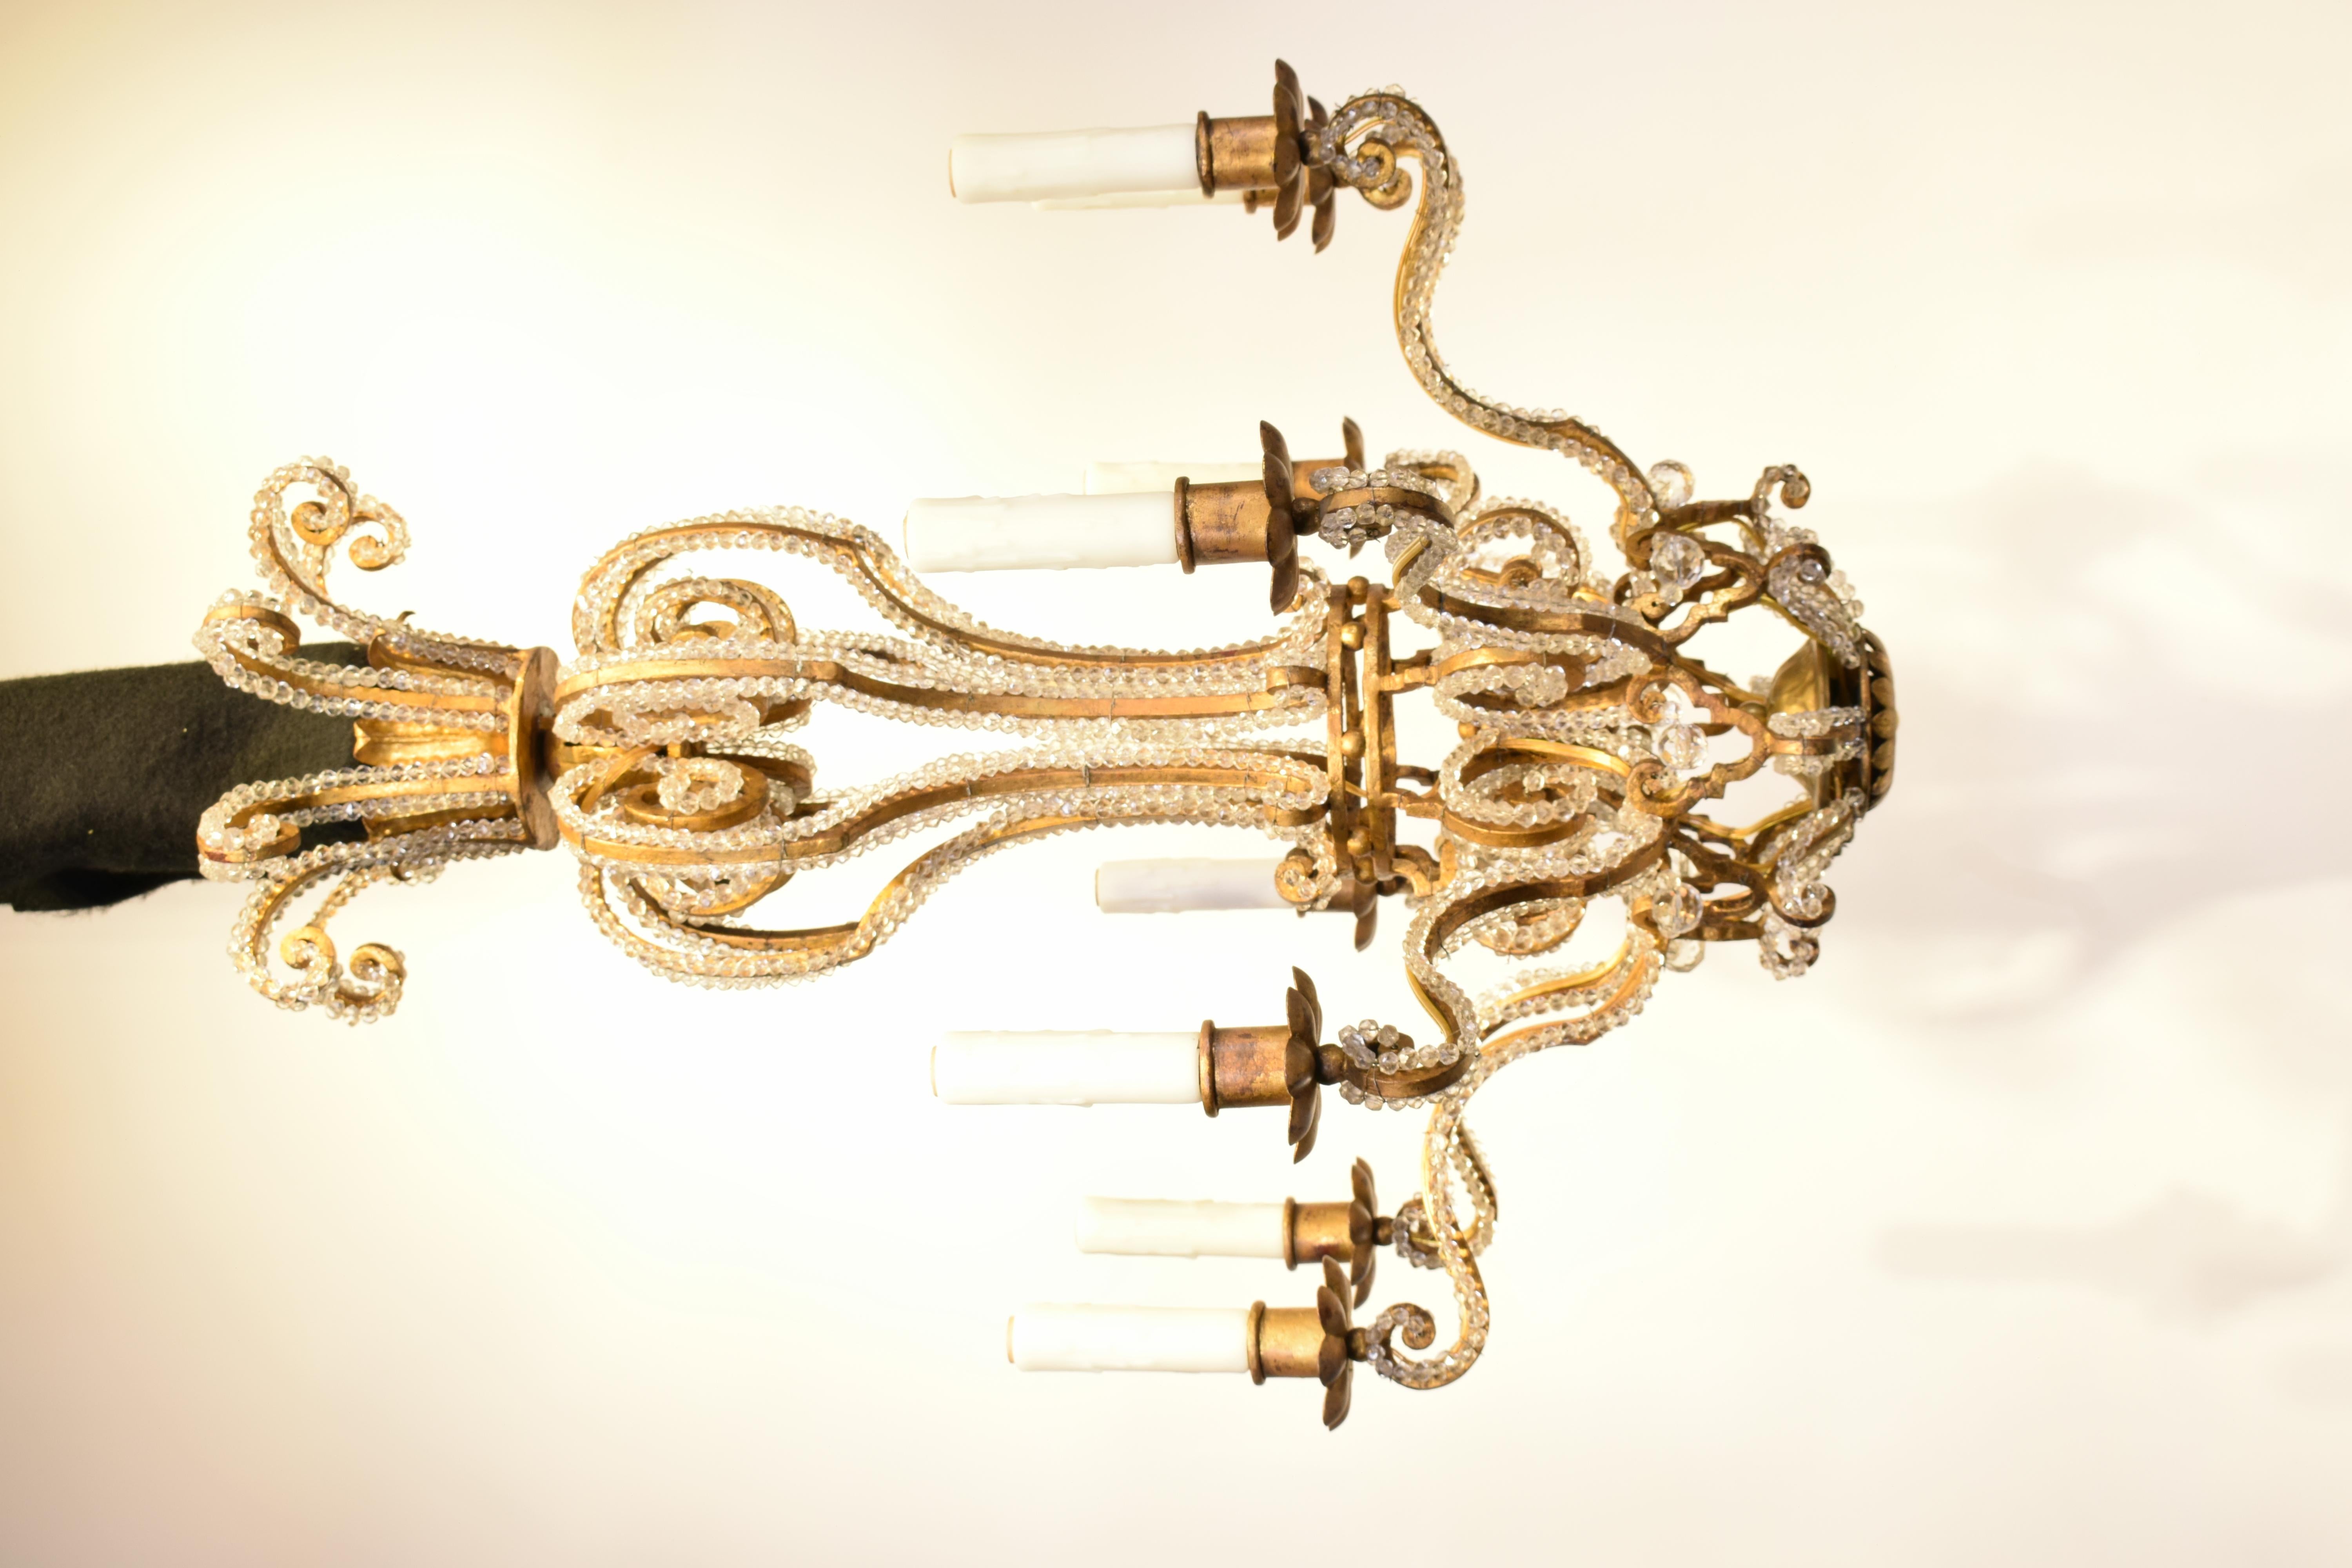 A Fine and Elegant Gilt Iron Chandelier ornated with chains of faceted beads. 
Maison Jansen, France, circa 1930. 8 lights.
Dimensions: Height 29